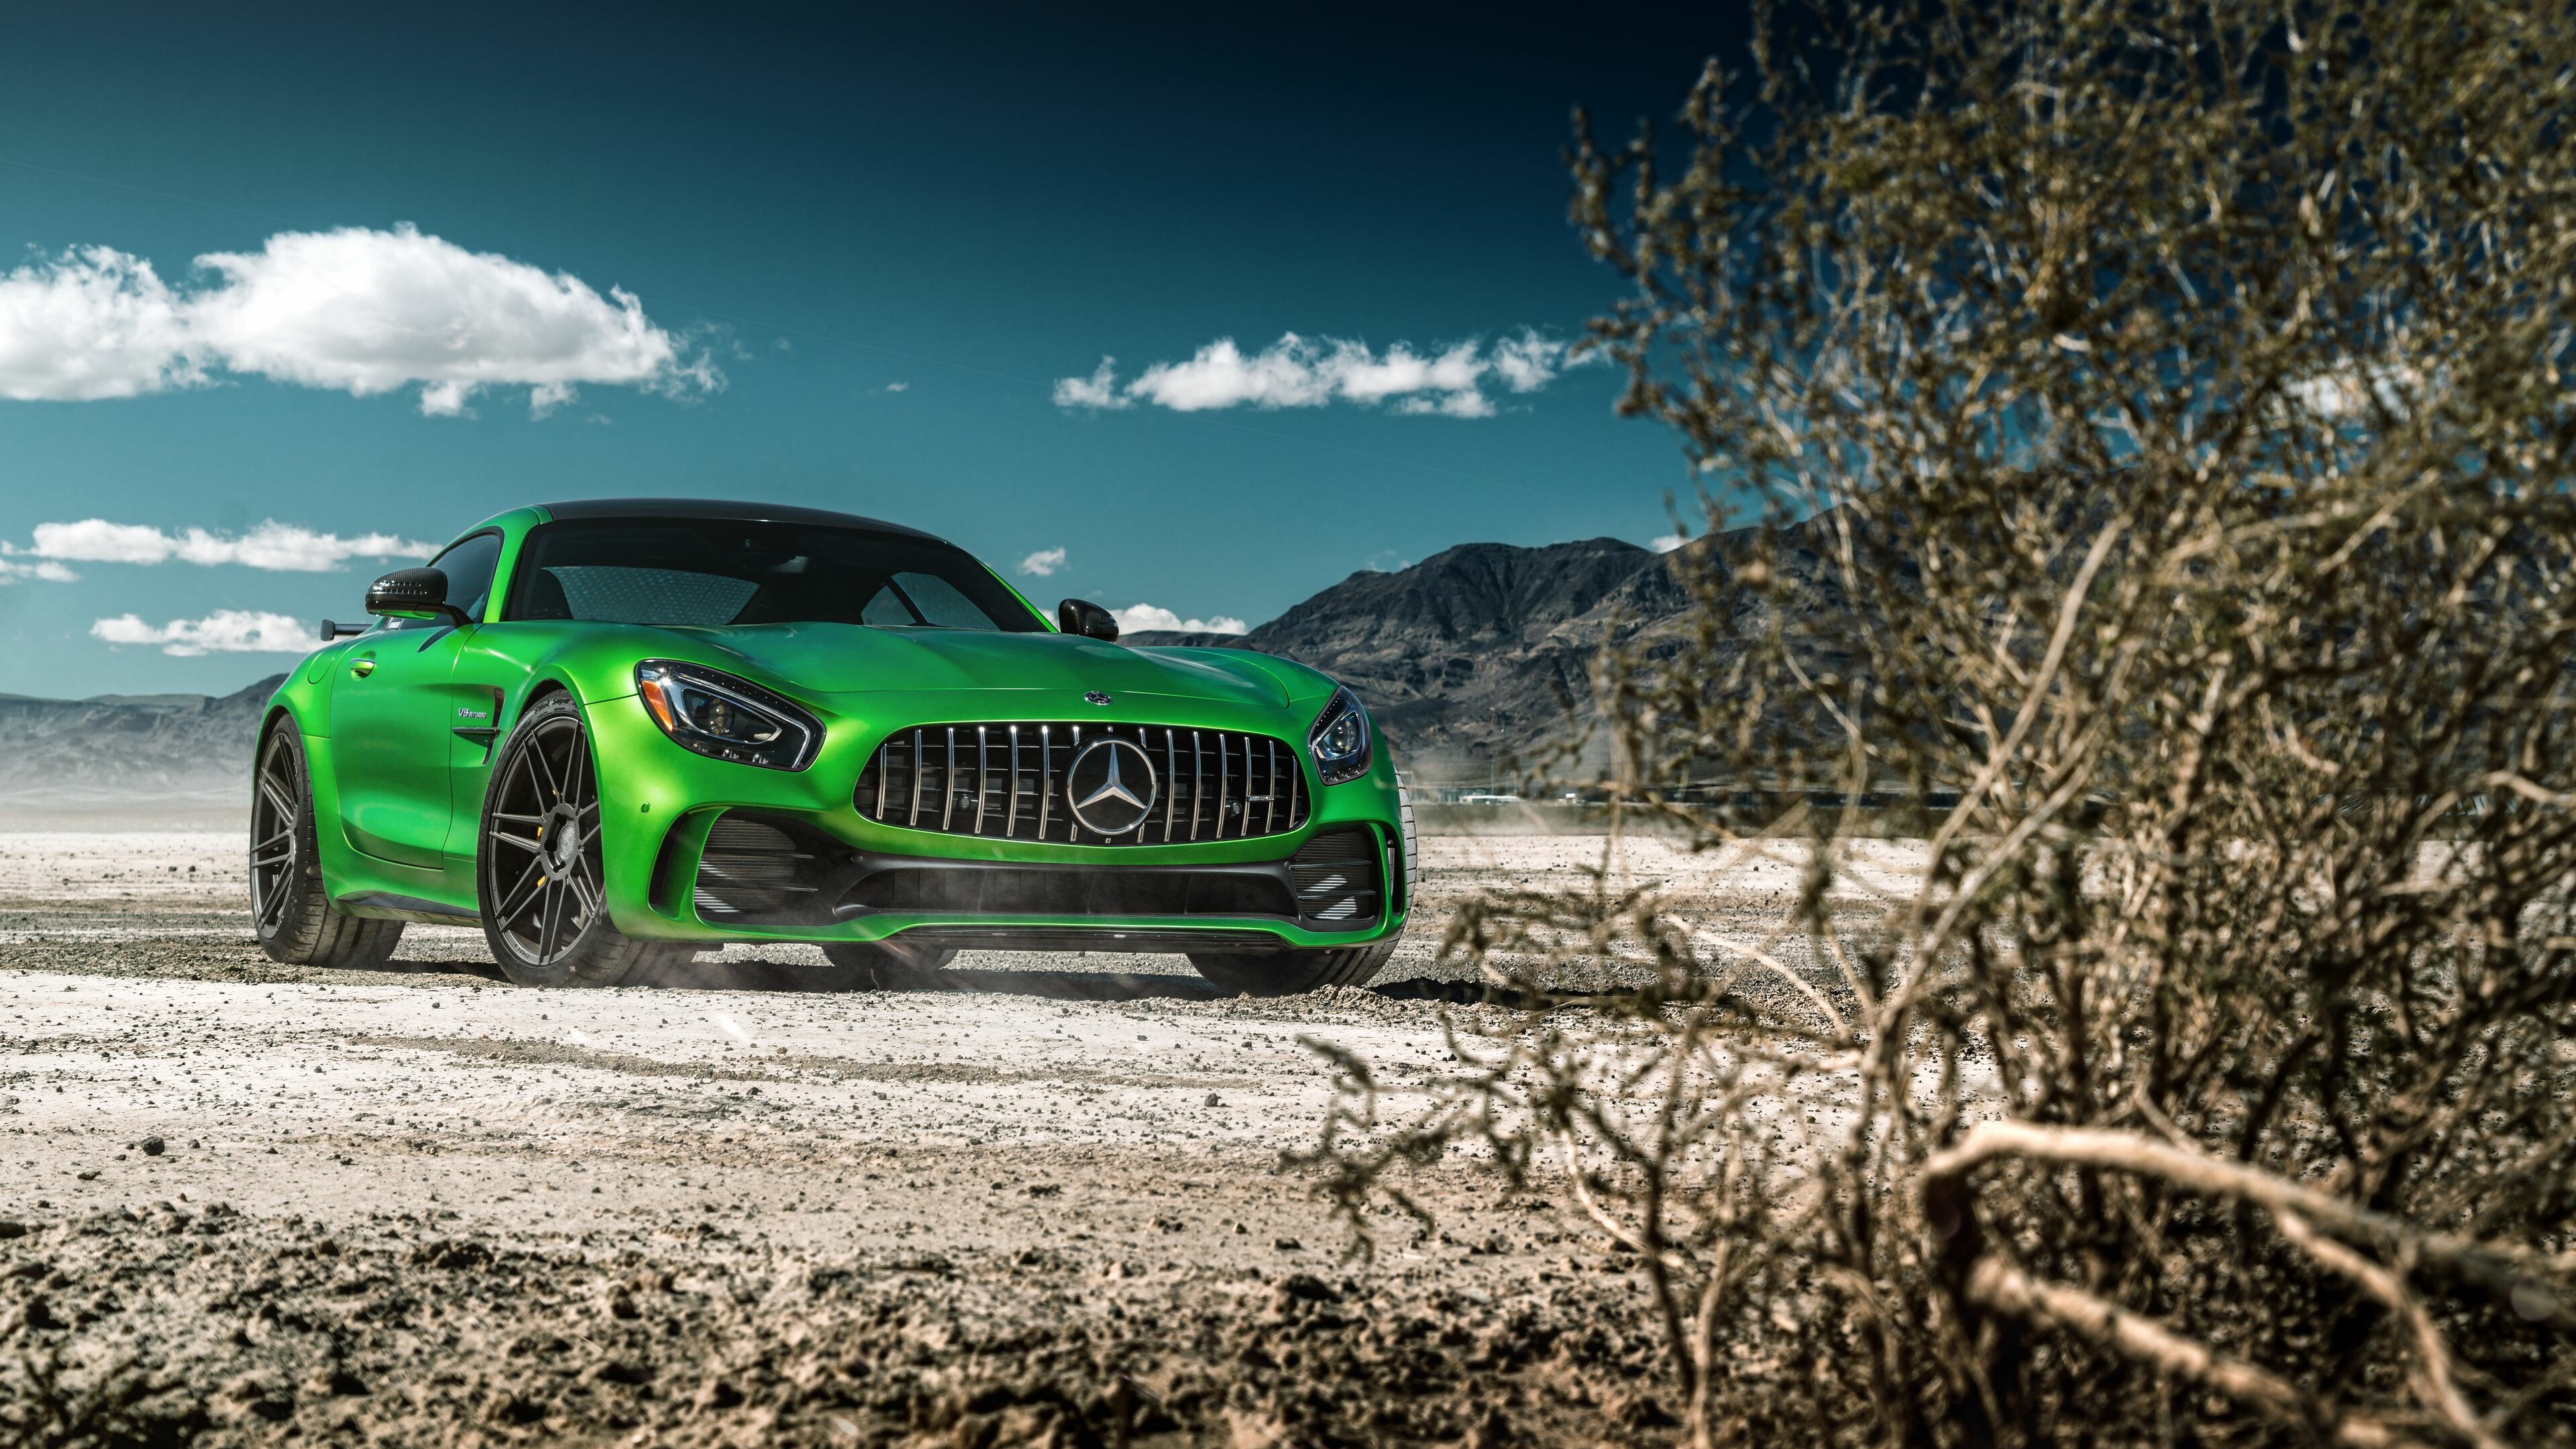 Mercedes-Benz: Green AMG GT, Produces E-Class, C-Class and GLK in Egypt via Egyptian German Automotive Company. 3840x2160 4K Background.